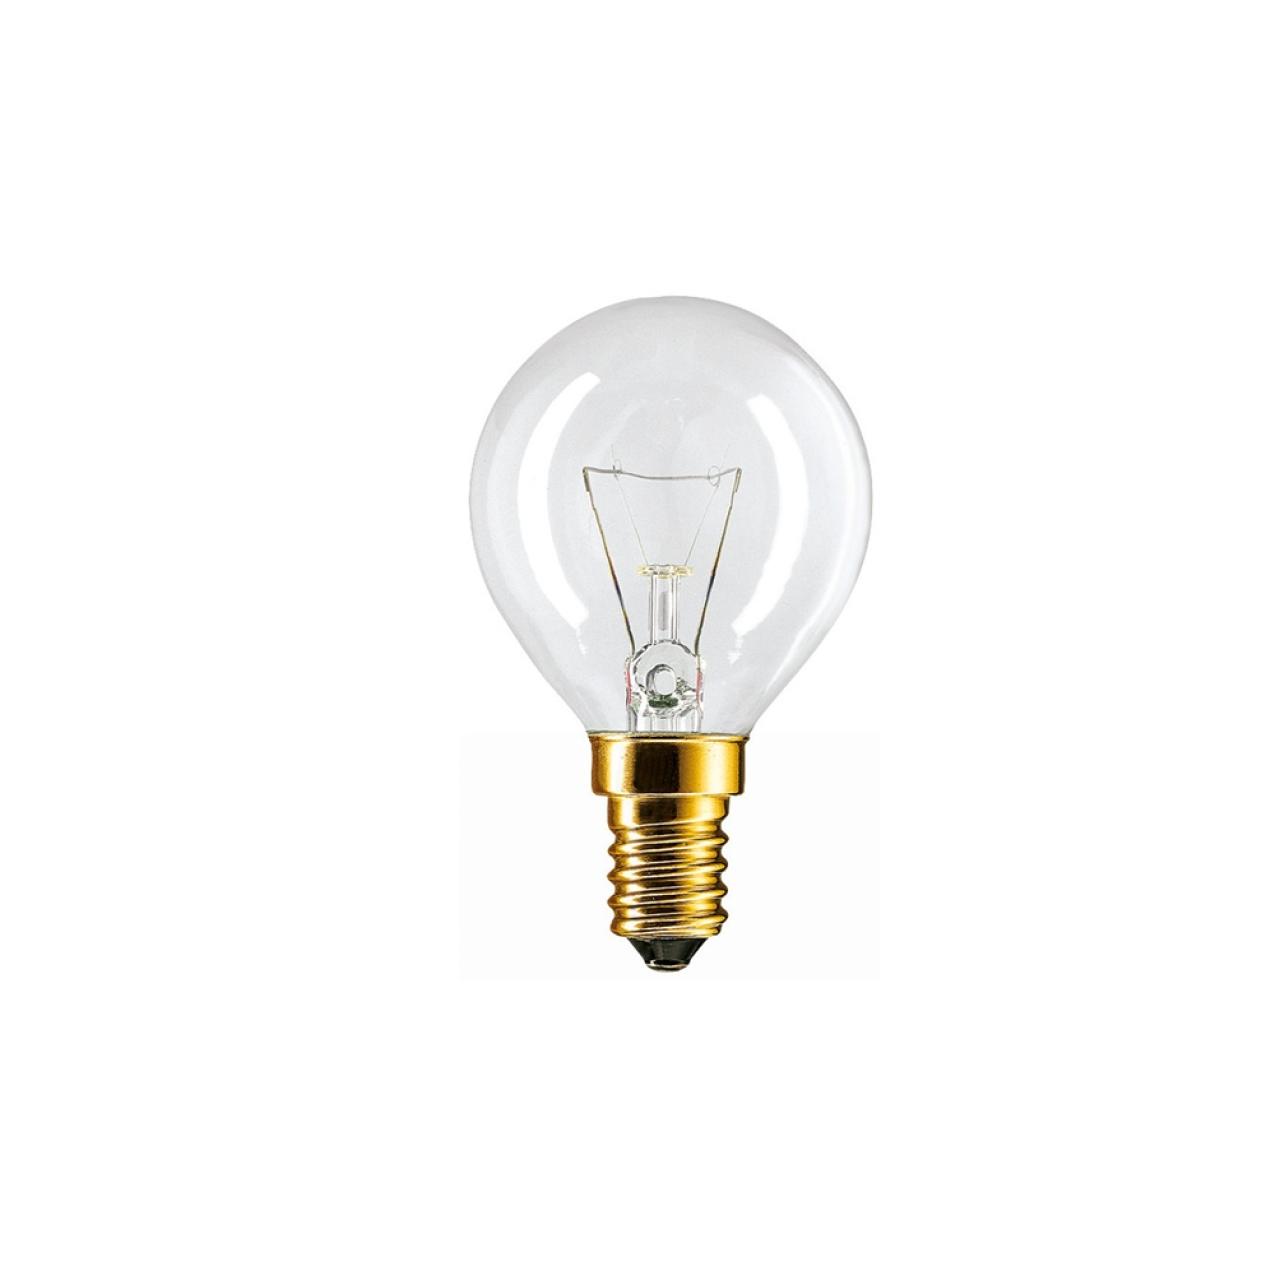 PHILIPS Glühlampe E14, 15 W, 90 lm, dimmbar